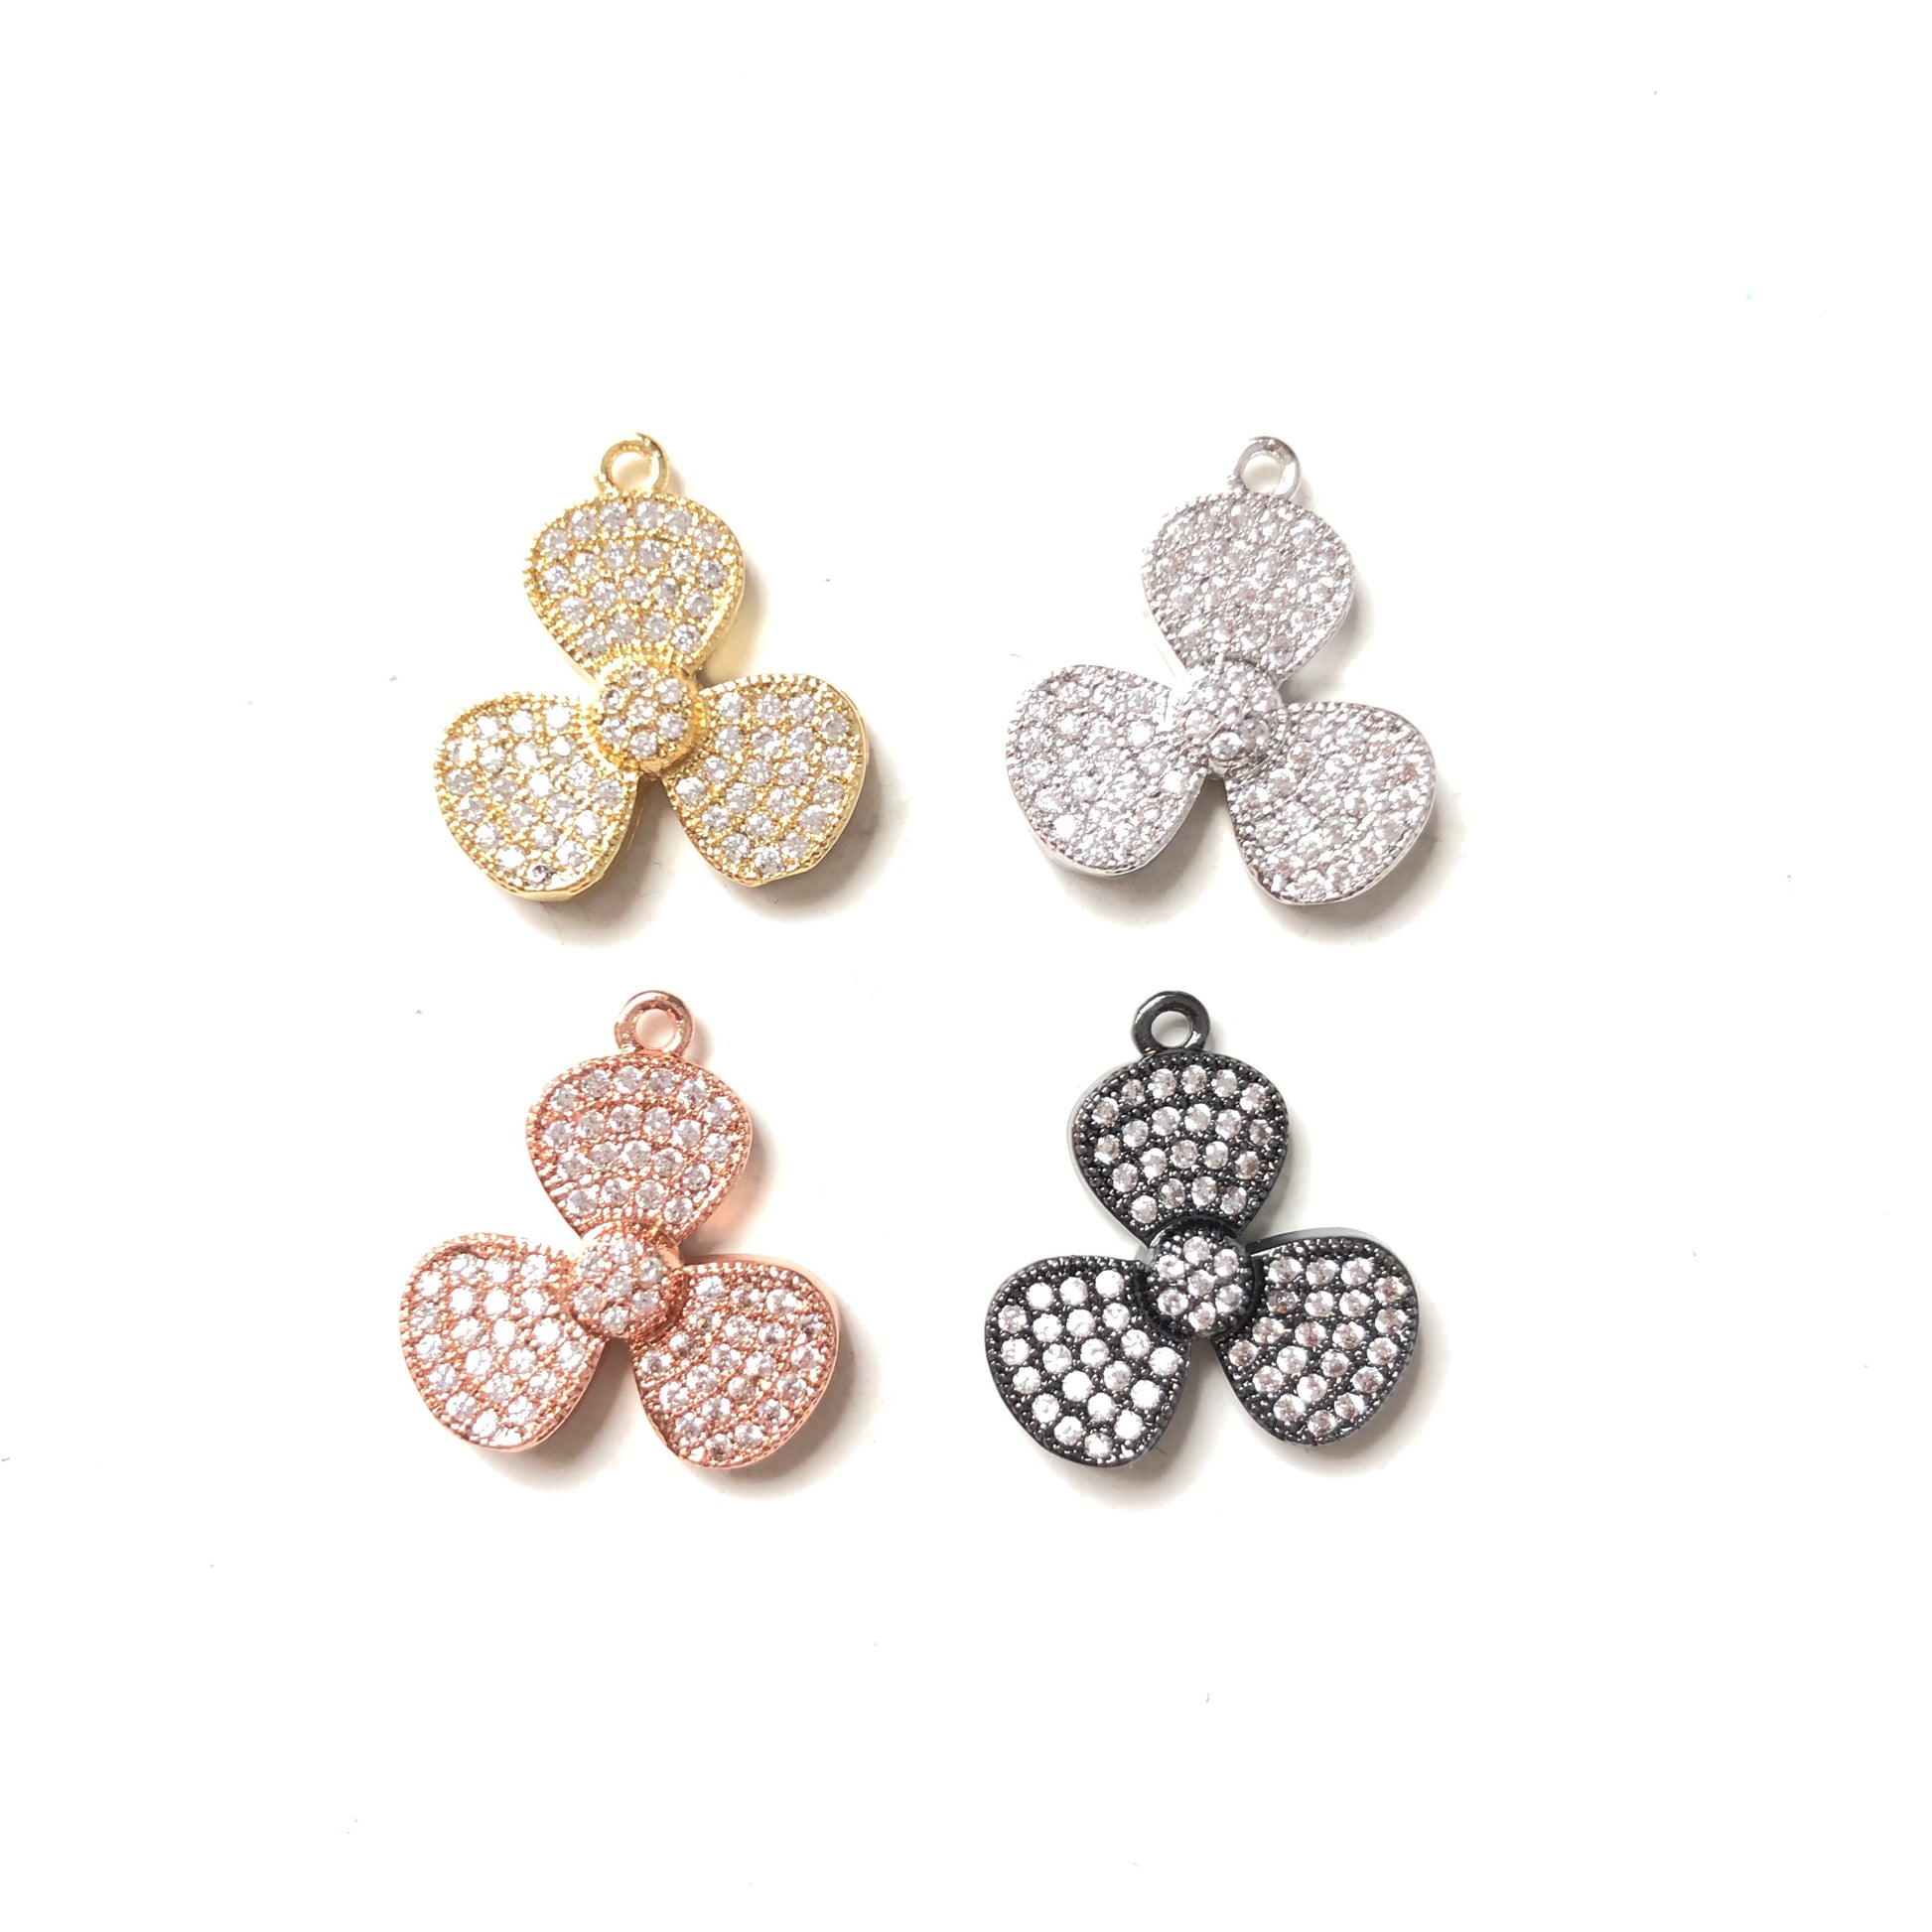 10pcs/lot 18*17mm CZ Paved Flower Charms CZ Paved Charms Flowers On Sale Charms Beads Beyond